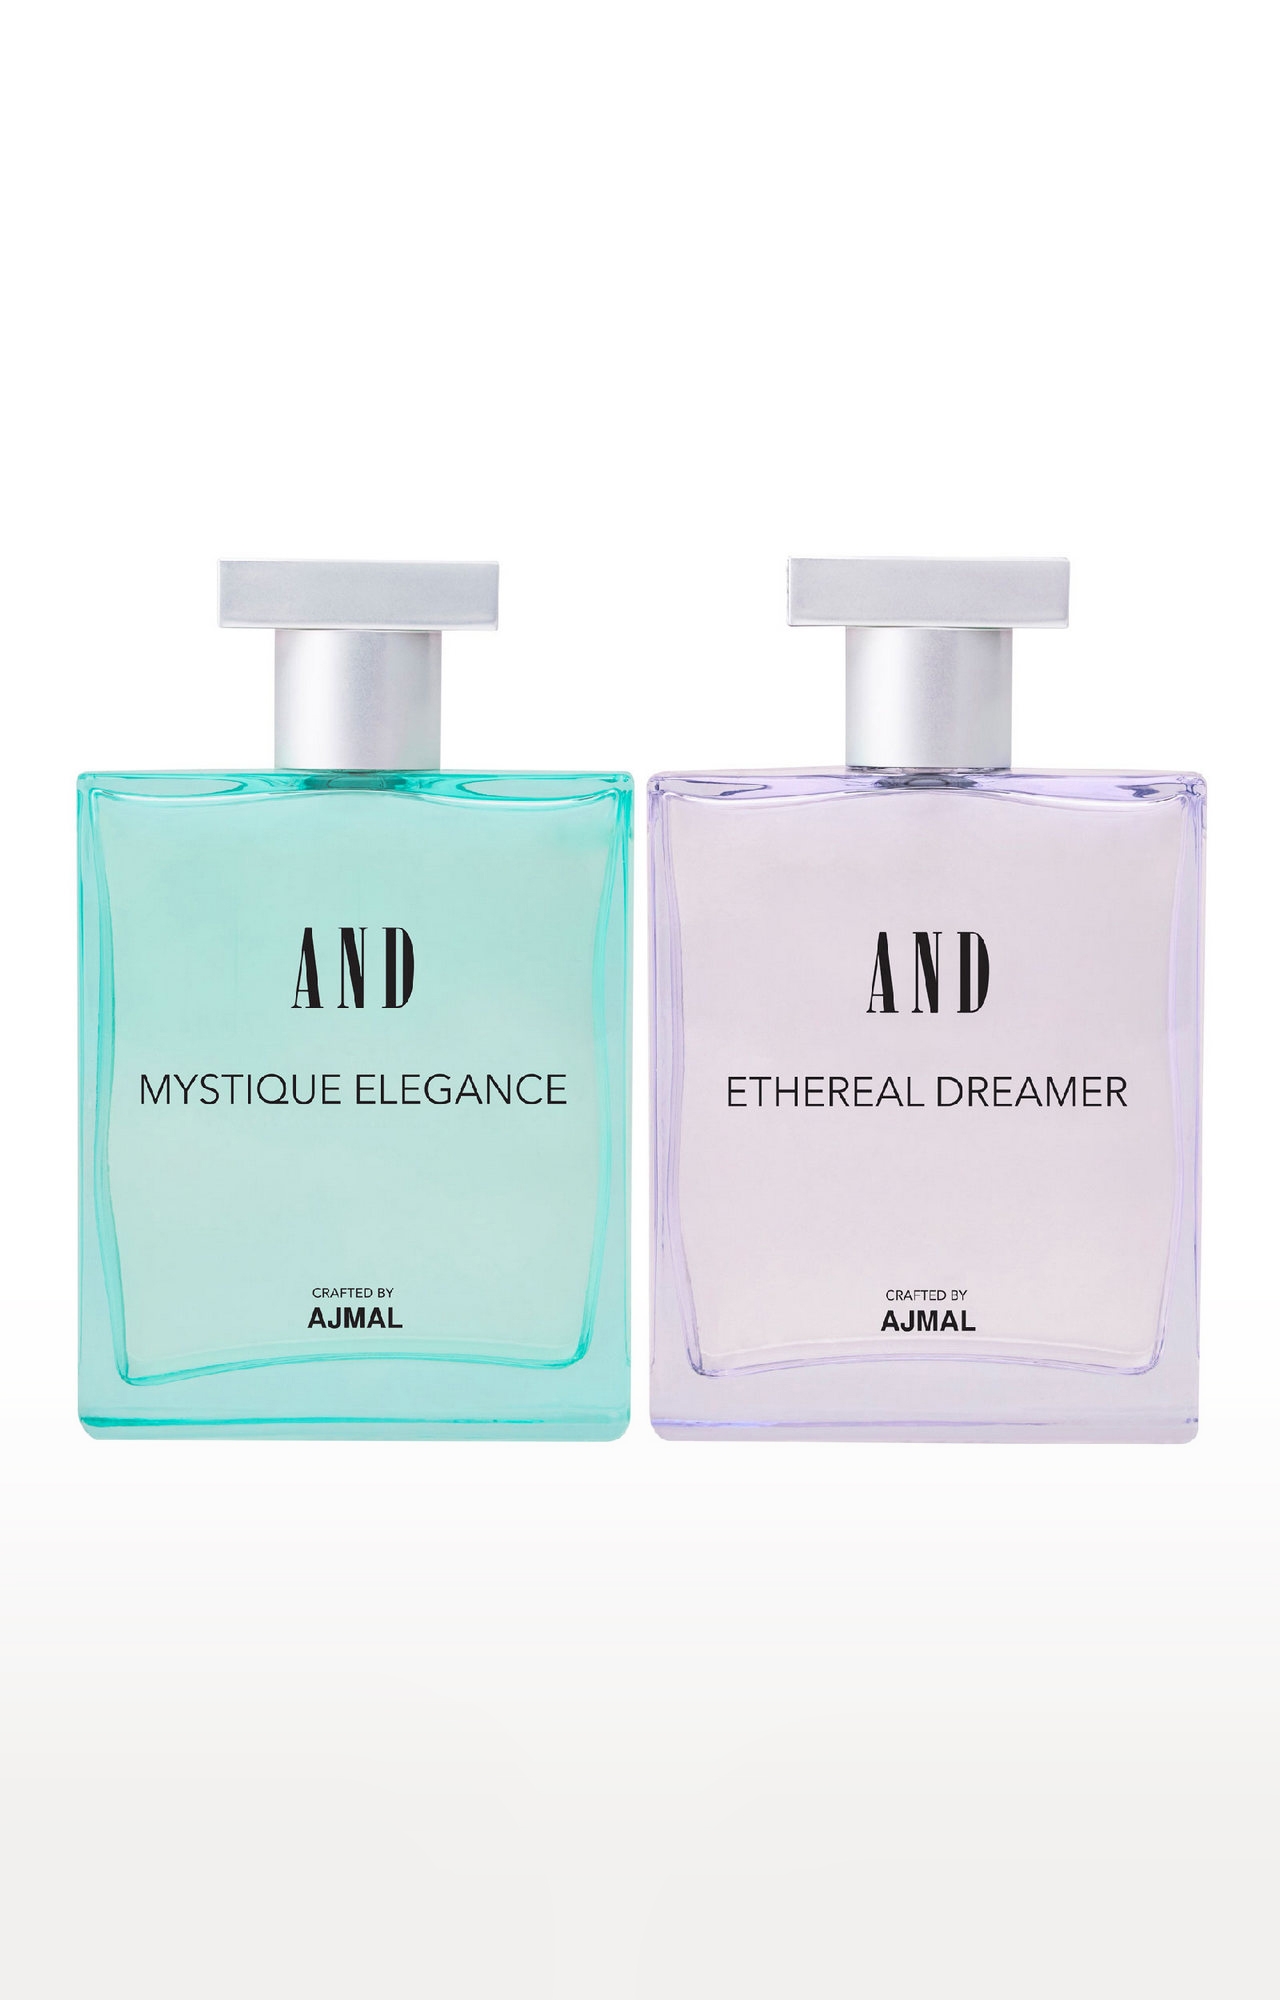 AND Crafted By Ajmal | AND Mystique Elegance & Ethereal Dreamer Pack of 2 Eau De Parfum 100ML each for Women Crafted by Ajmal 